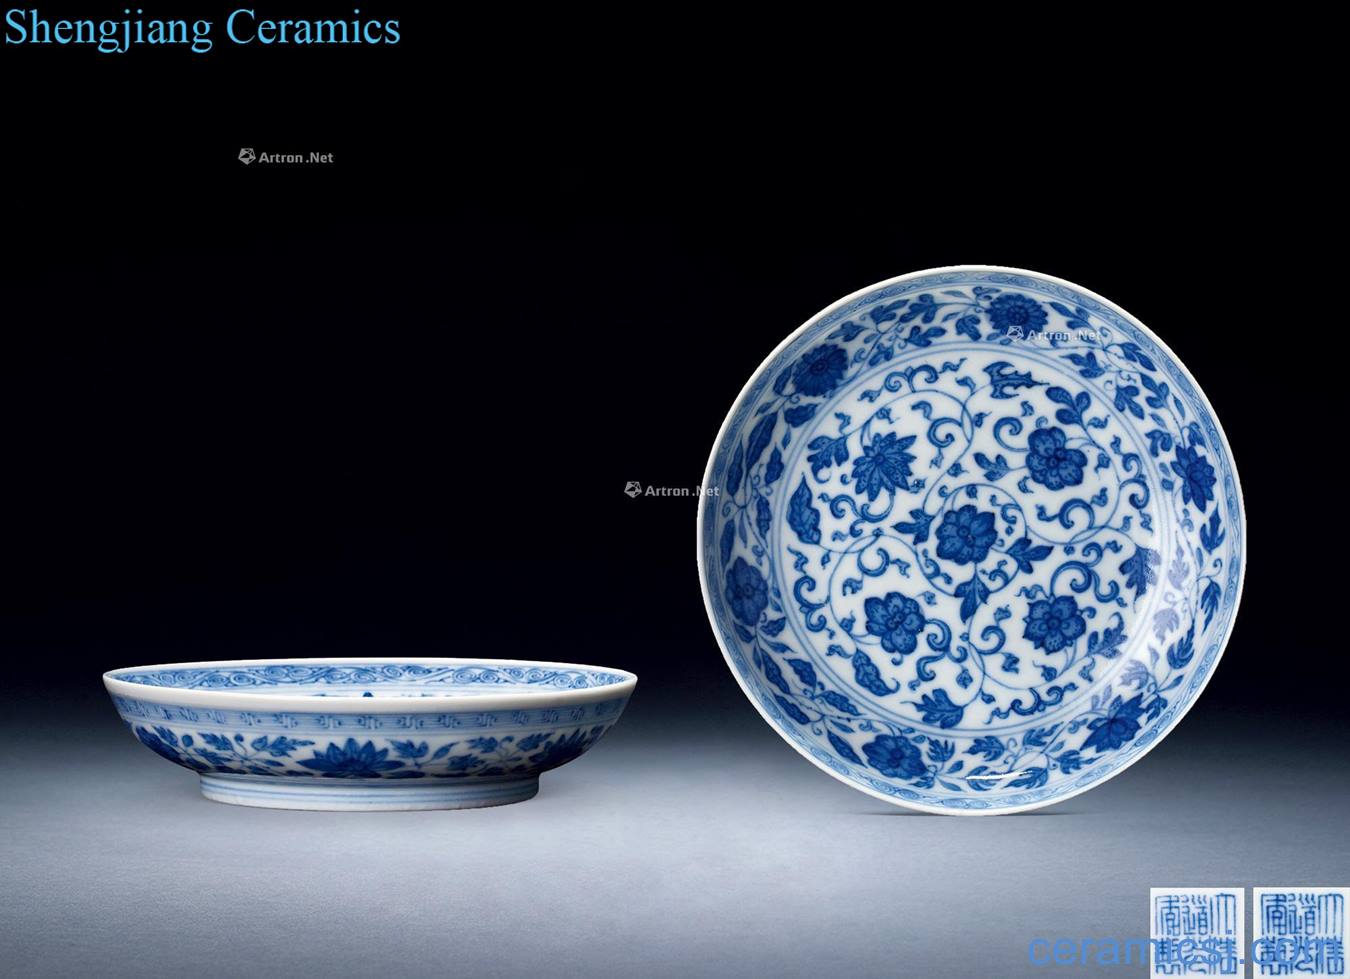 Qing daoguang Blue and white lotus design tray (a)